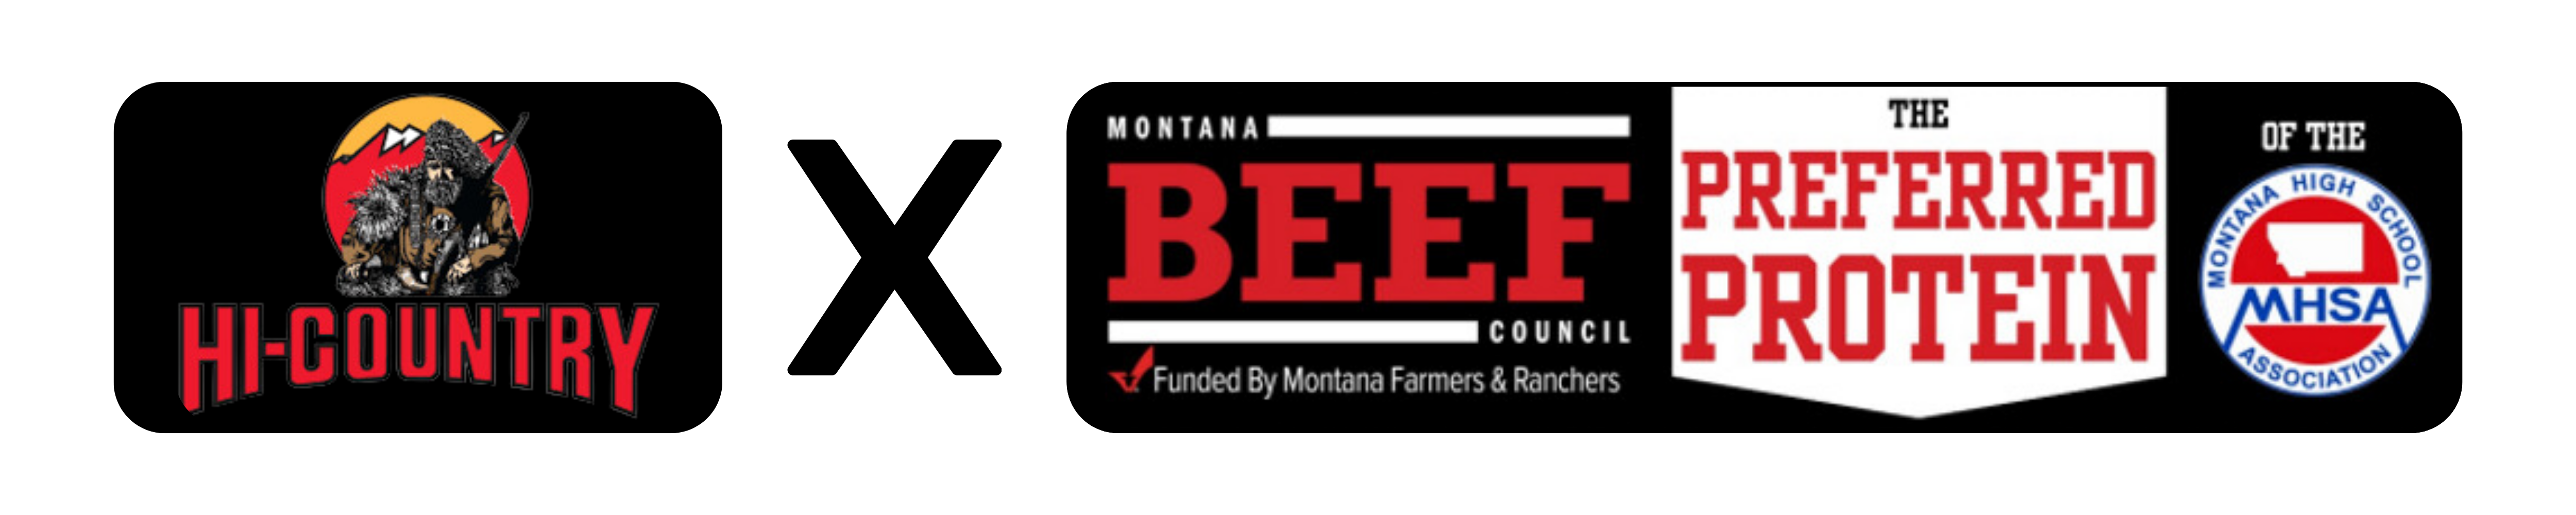 Montana Beef Council Hi-Country Snack Foods